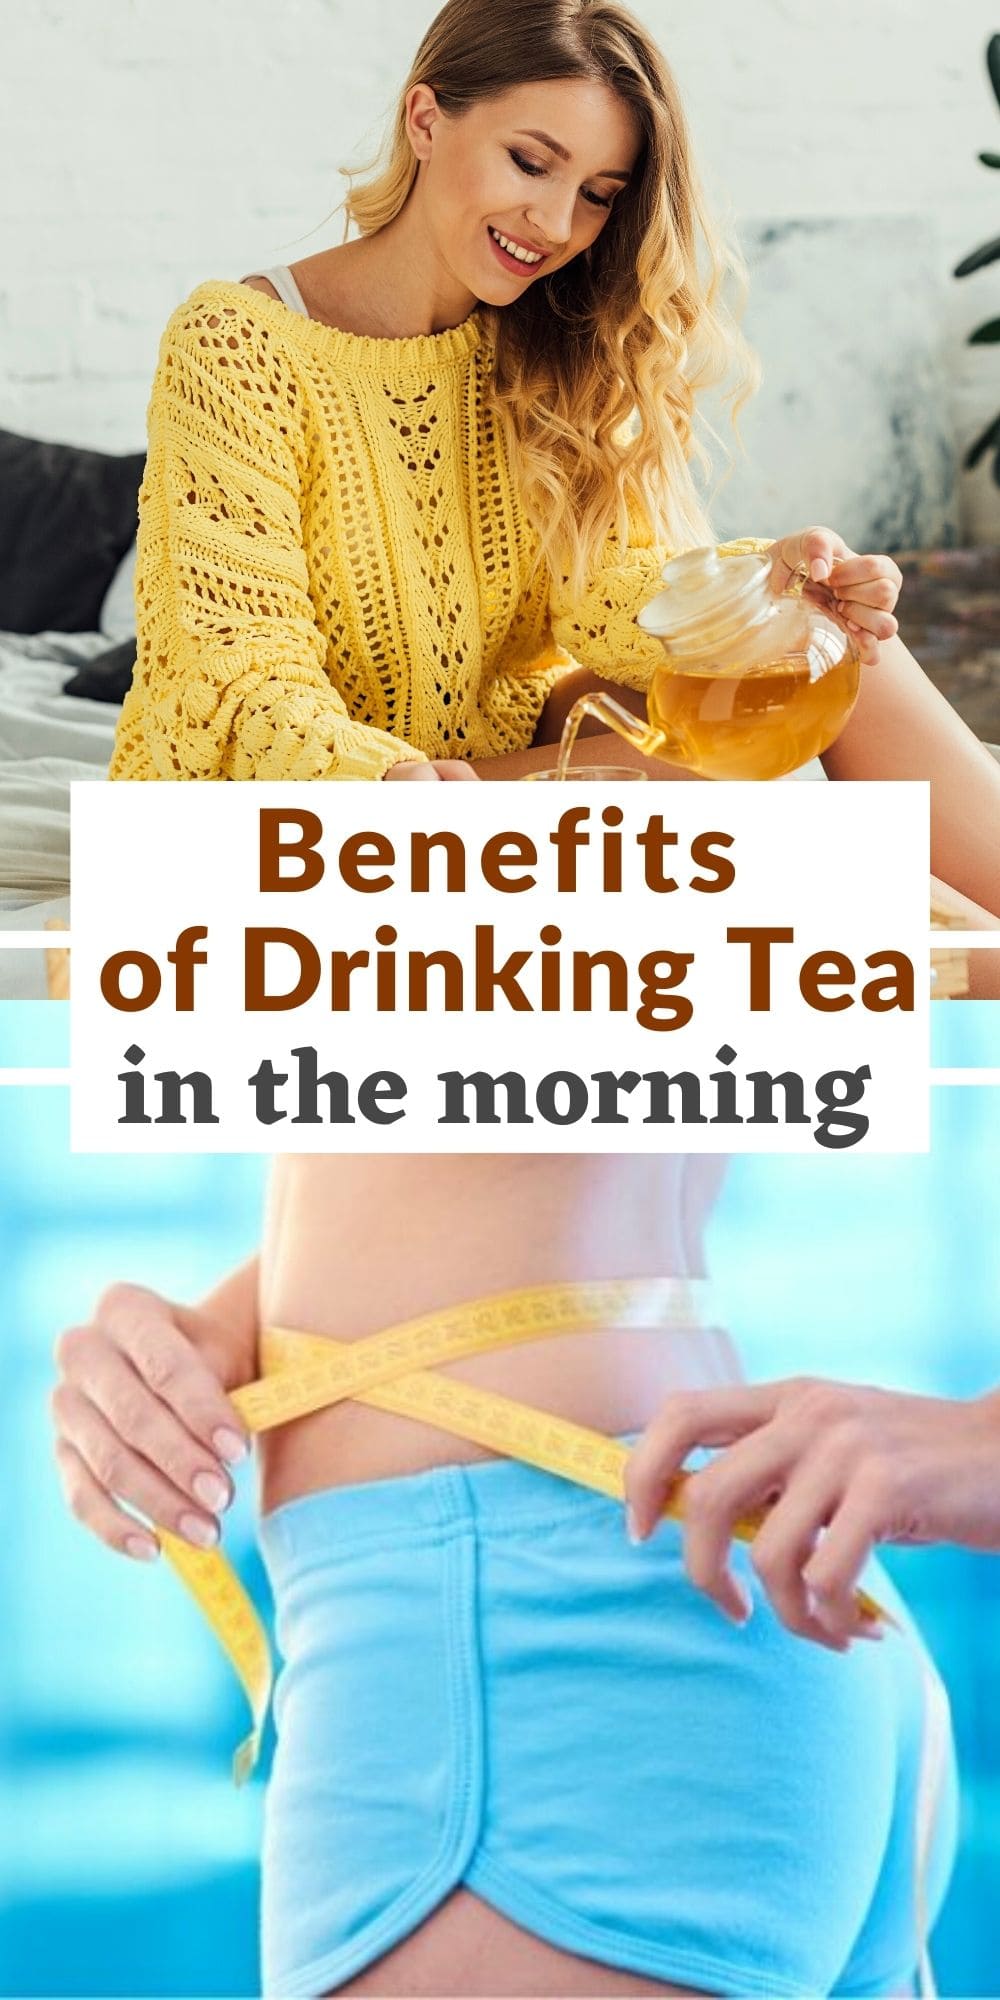 Benefits of drinking tea in the morning